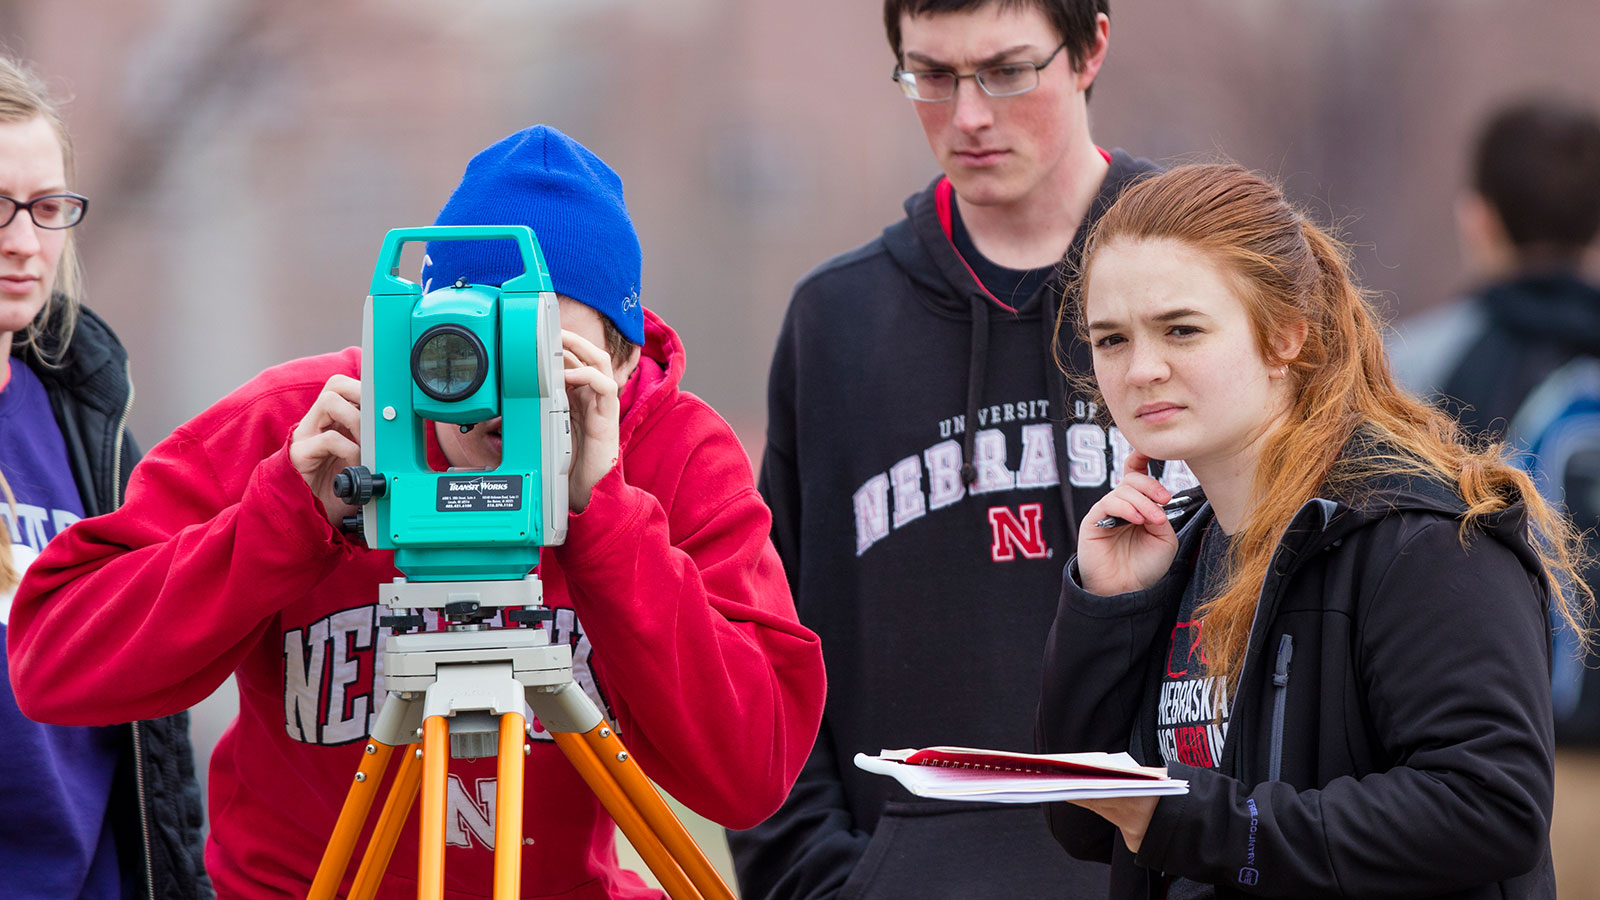 Students work with surveying equipment.